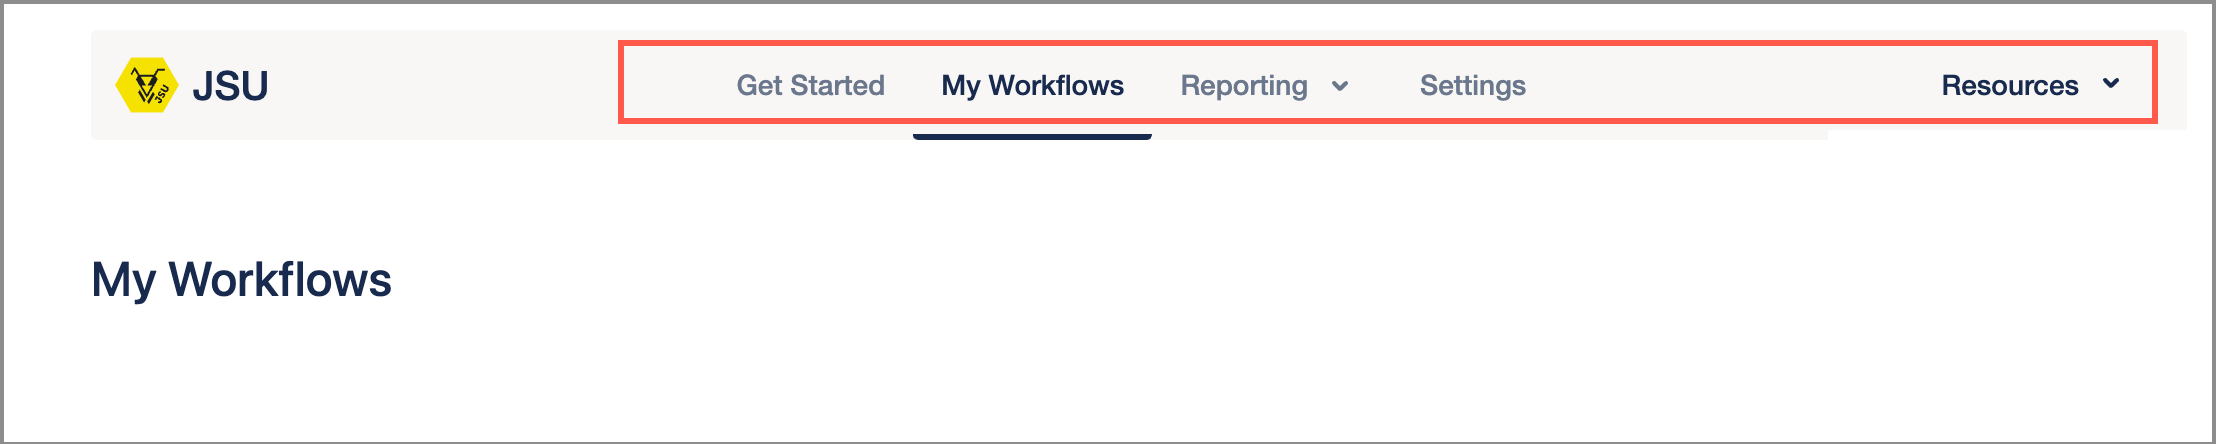 JSU Global Navigation highlighted on the My Workflows page